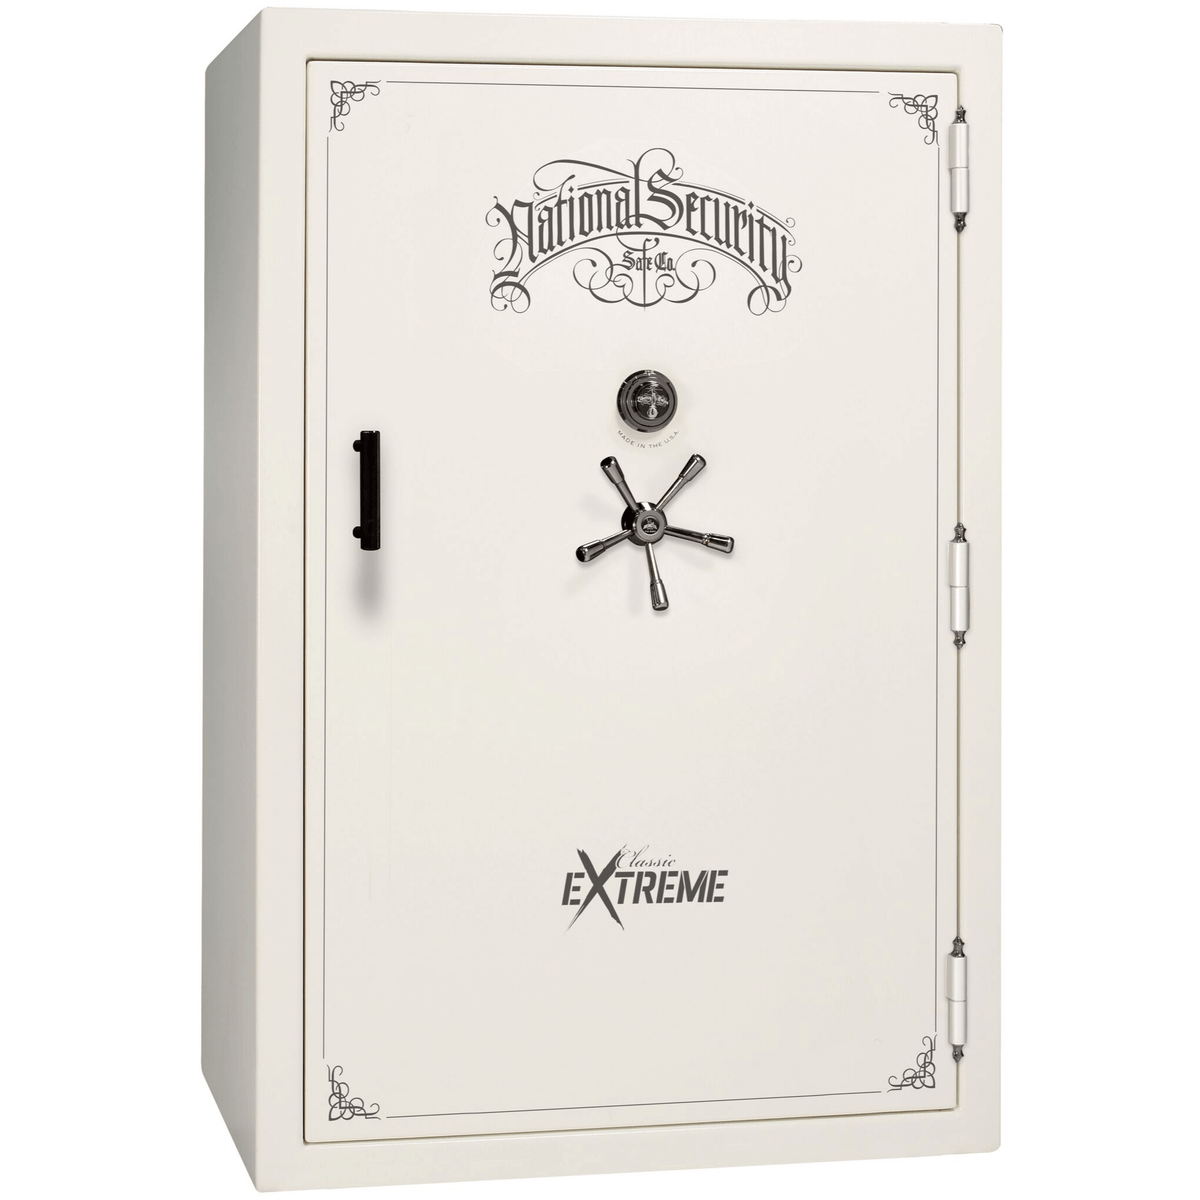 Liberty Classic Select Extreme Wide Body Safe in White Gloss with Black Chrome Mechanical Lock.